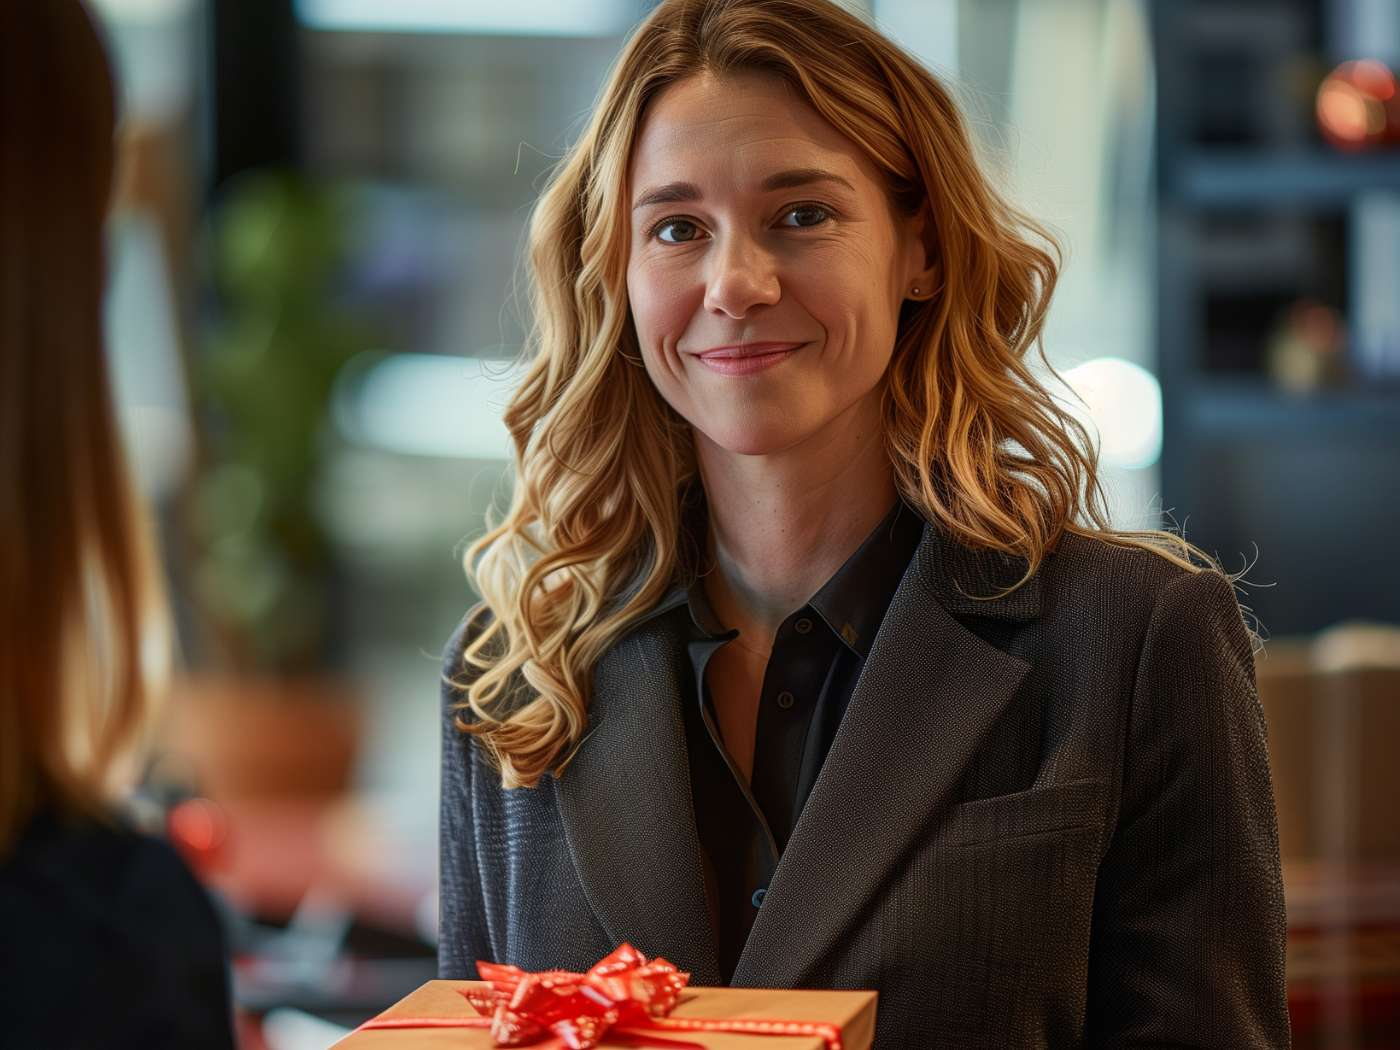 A smiling woman with wavy hair in business attire holding a vibrant orange gift box with a red ribbon, brought to you by Fabulous Flowers and Gifts.